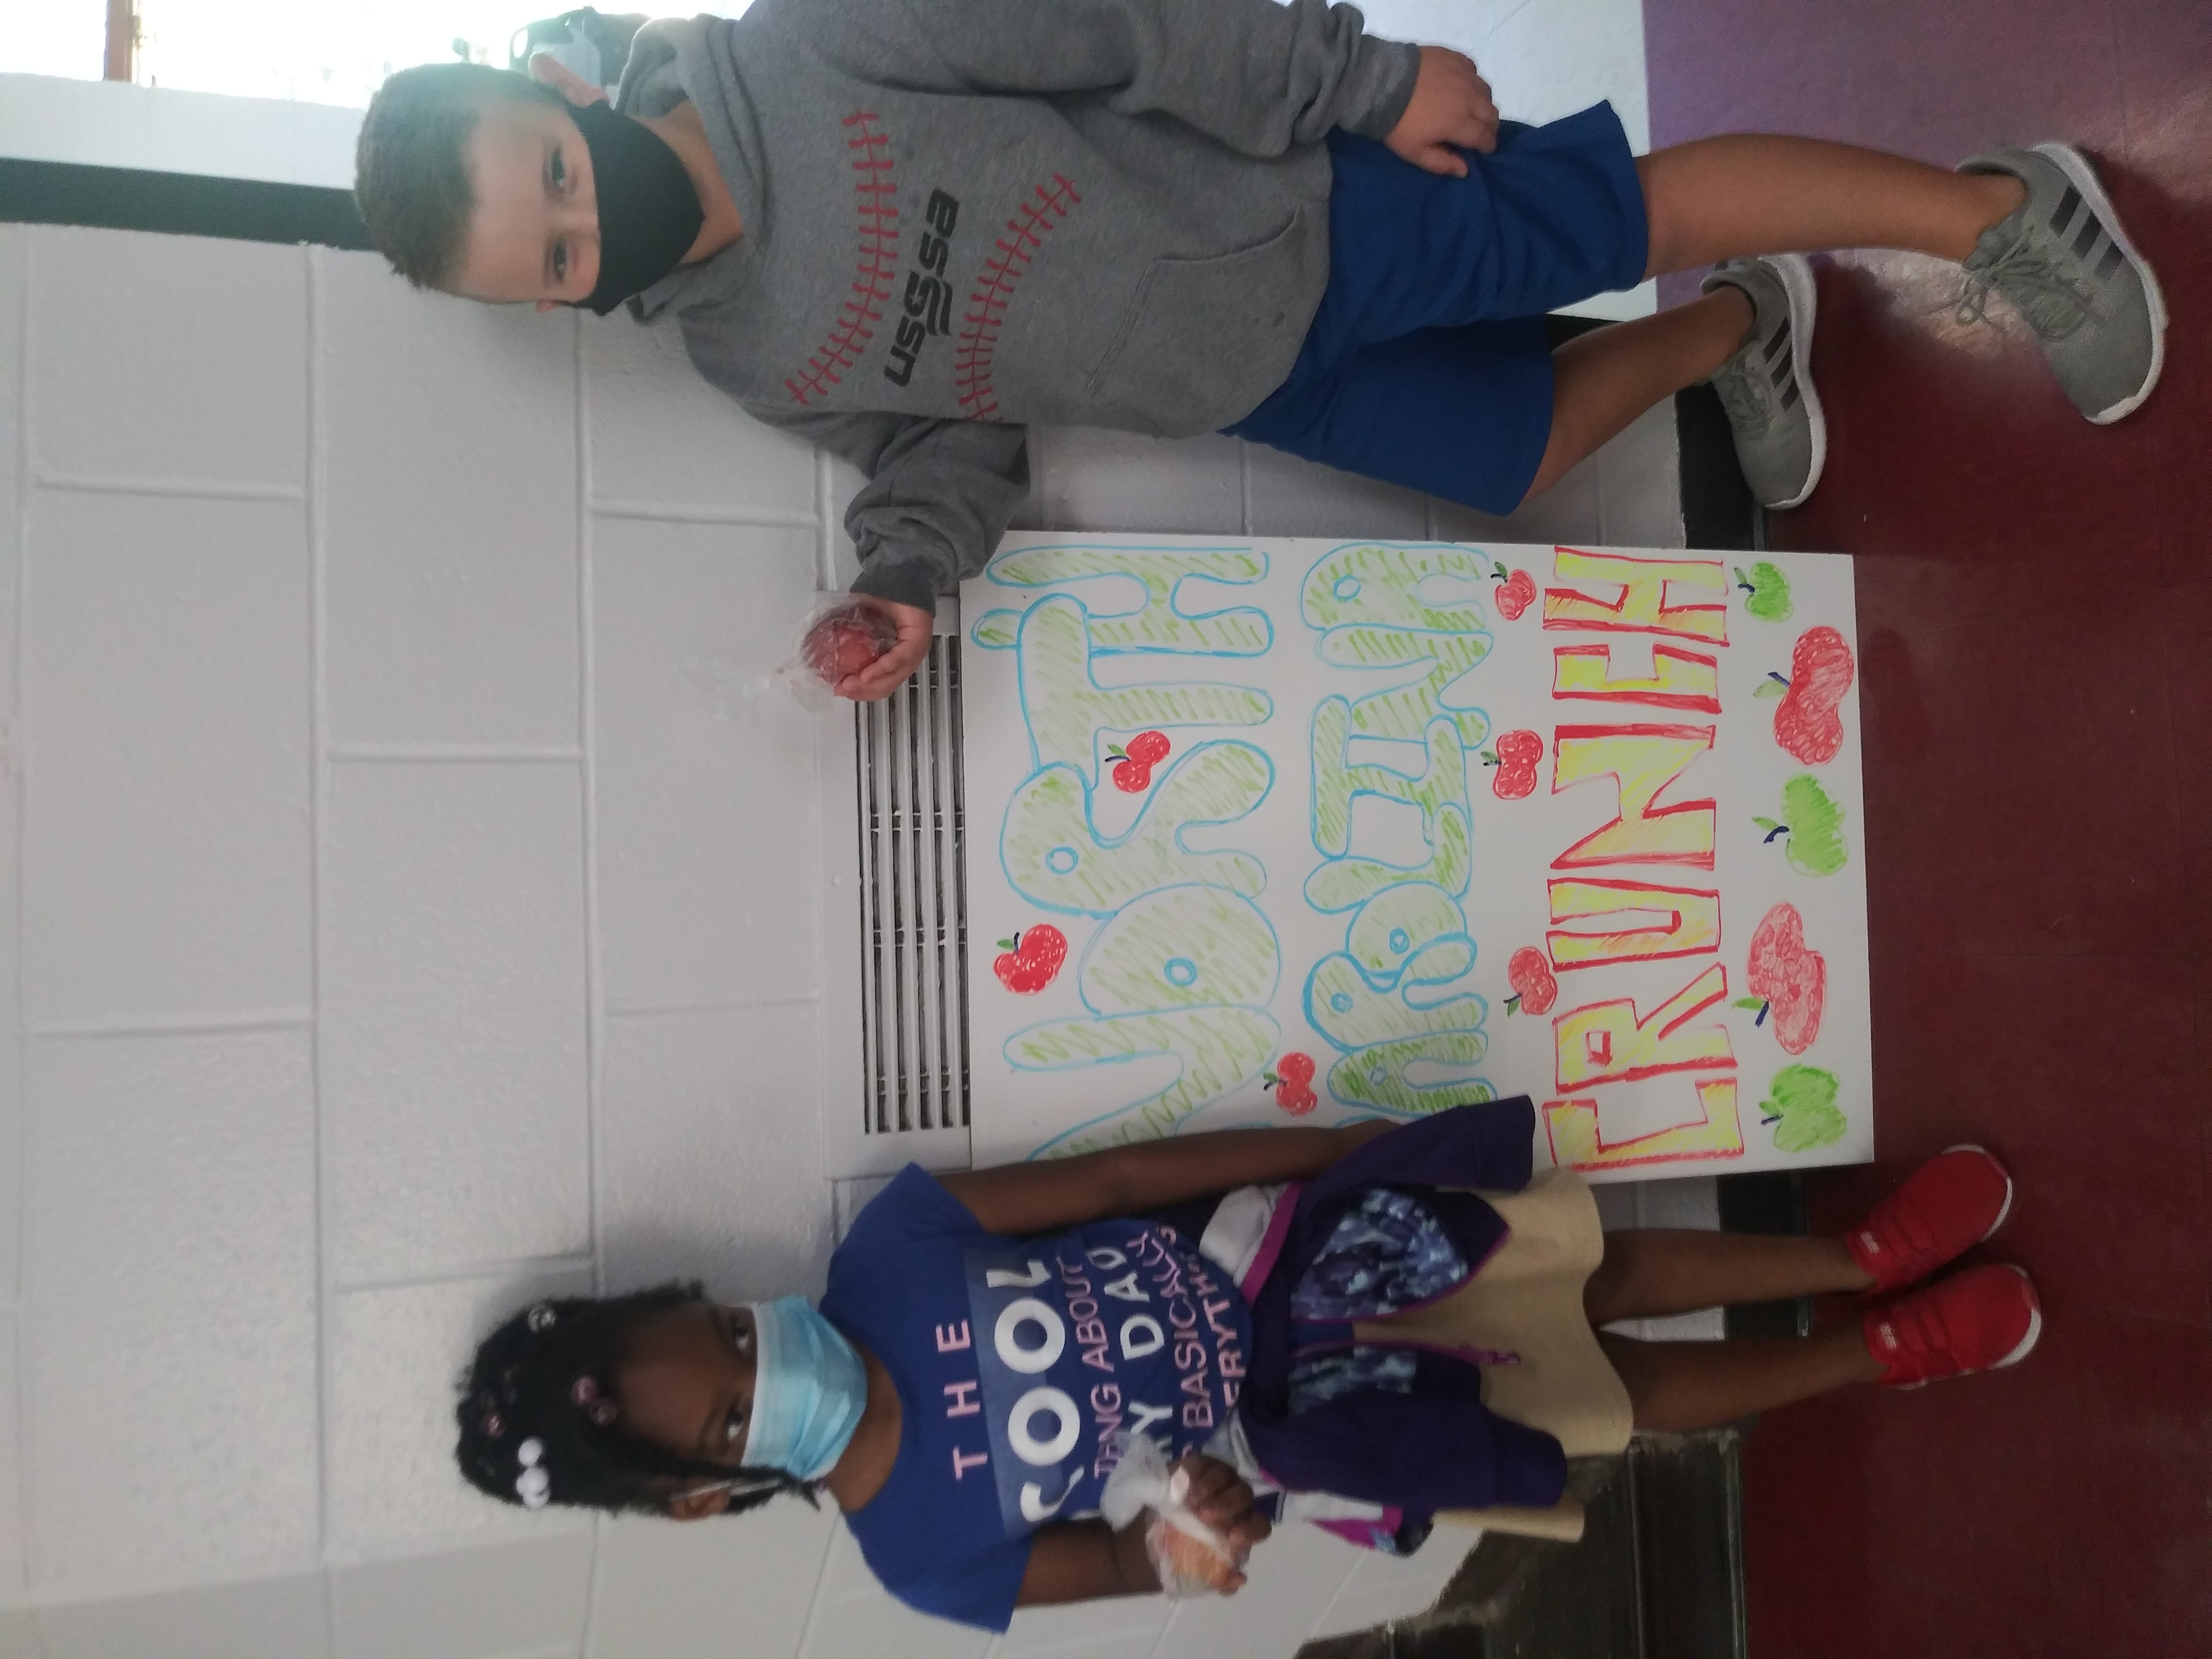 two students holding apples with "North Carolina Crunch" Sign